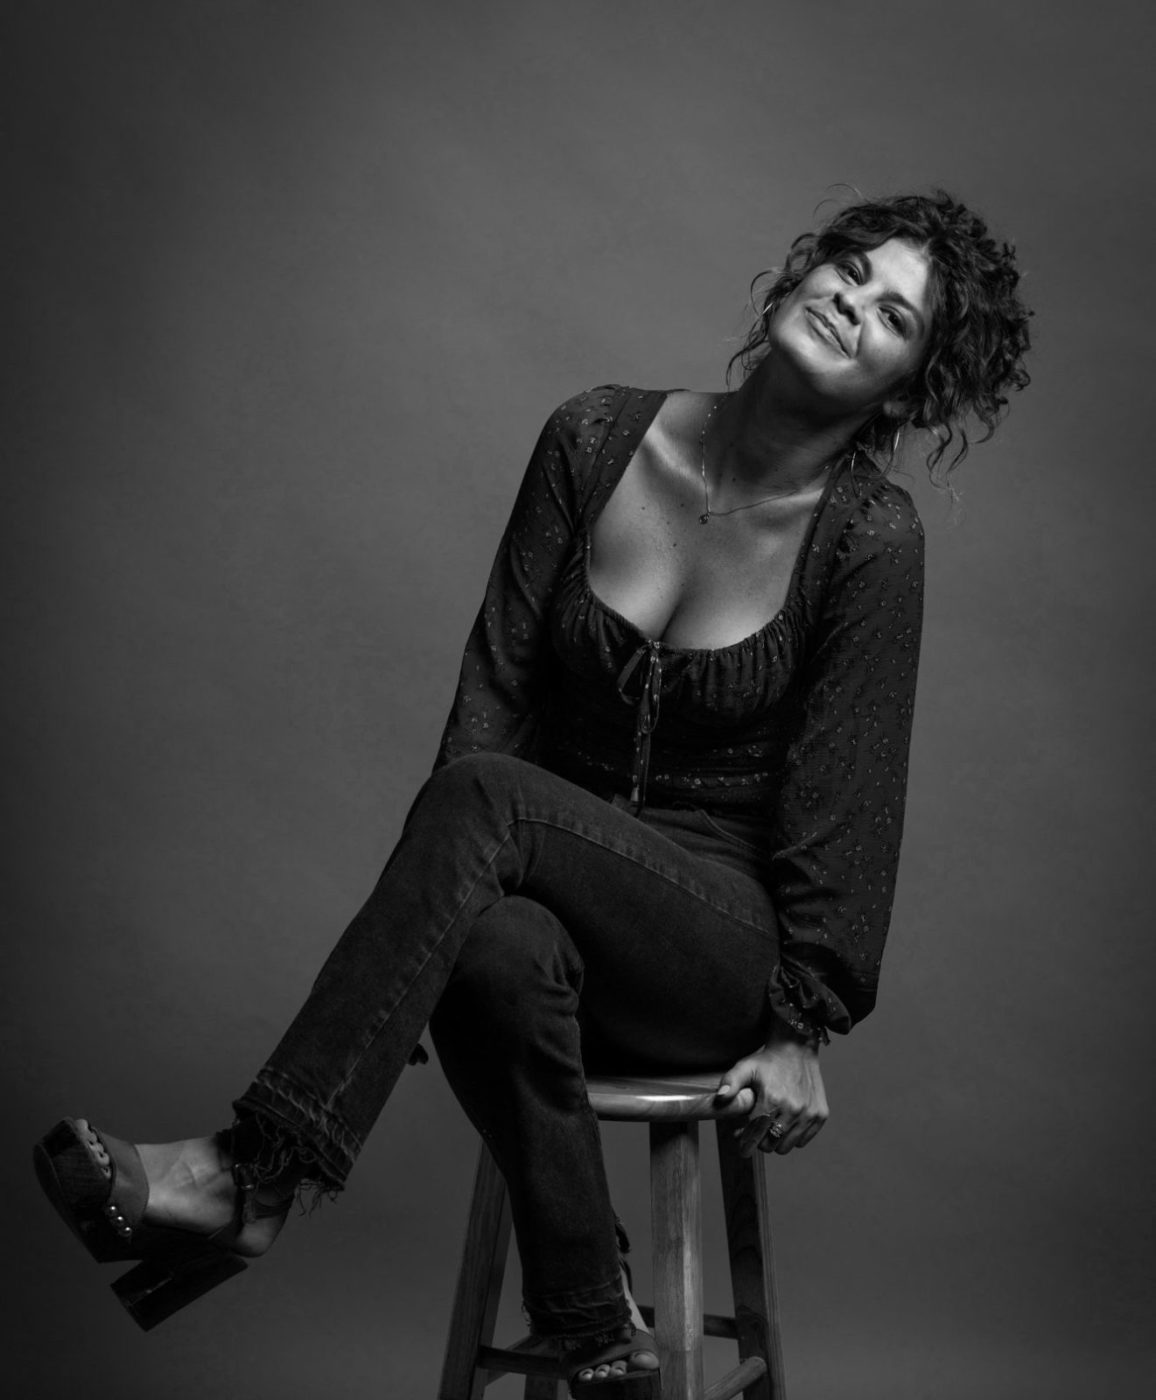 person sitting on a stool in black and white